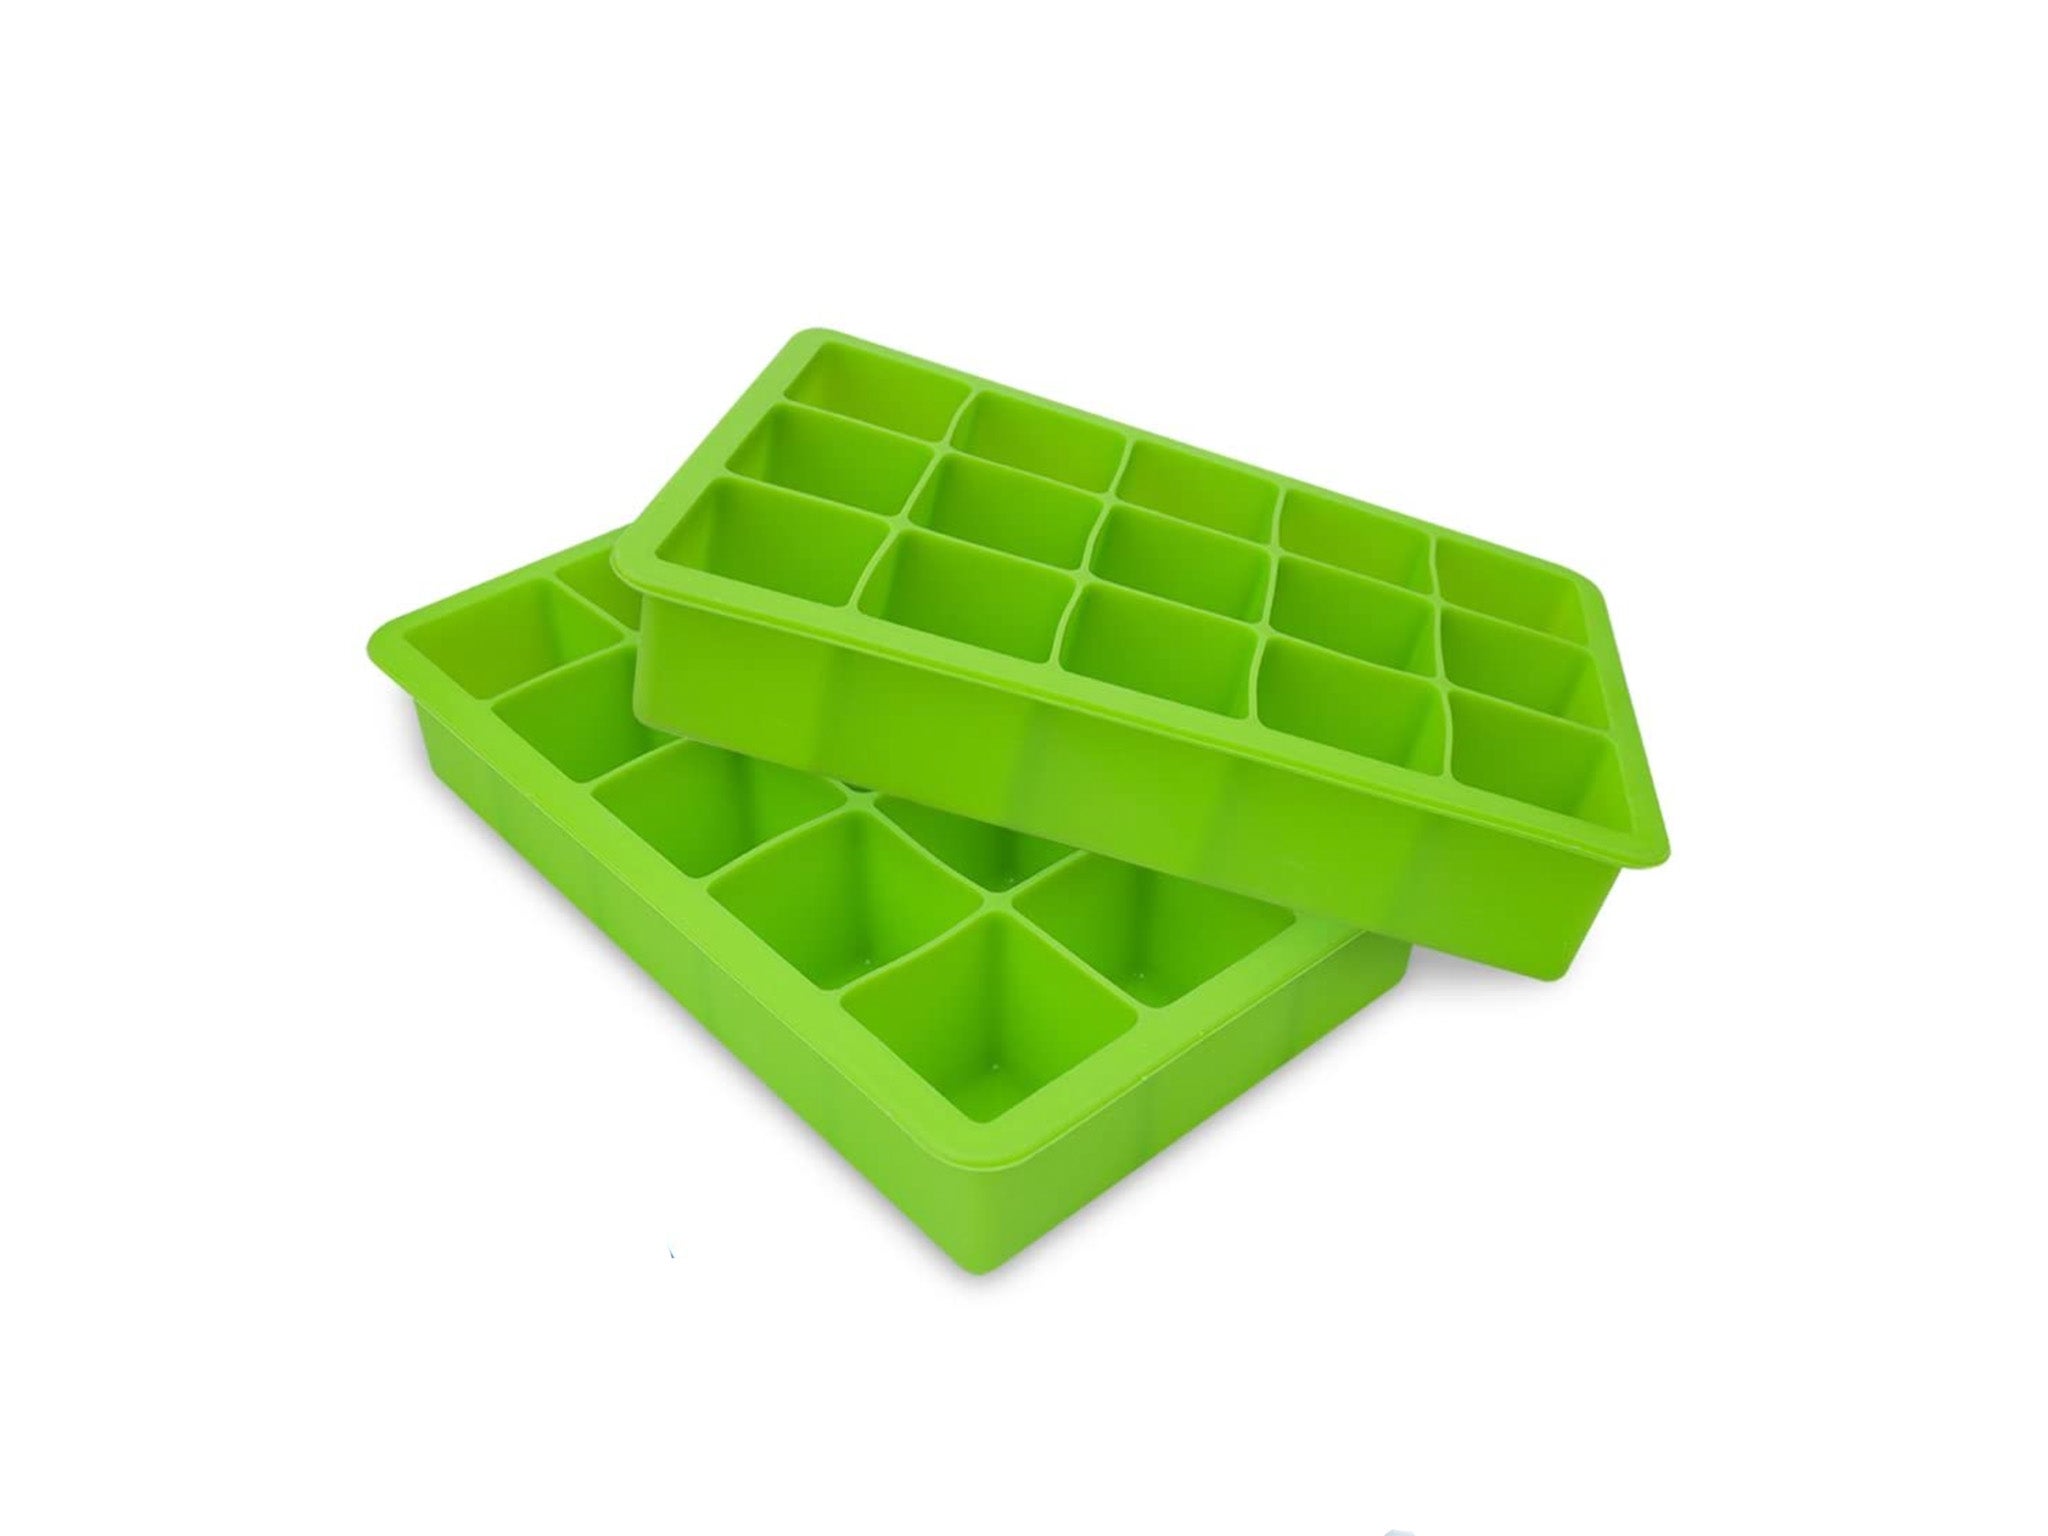 Fill up your ice cube trays and add to their food bowels